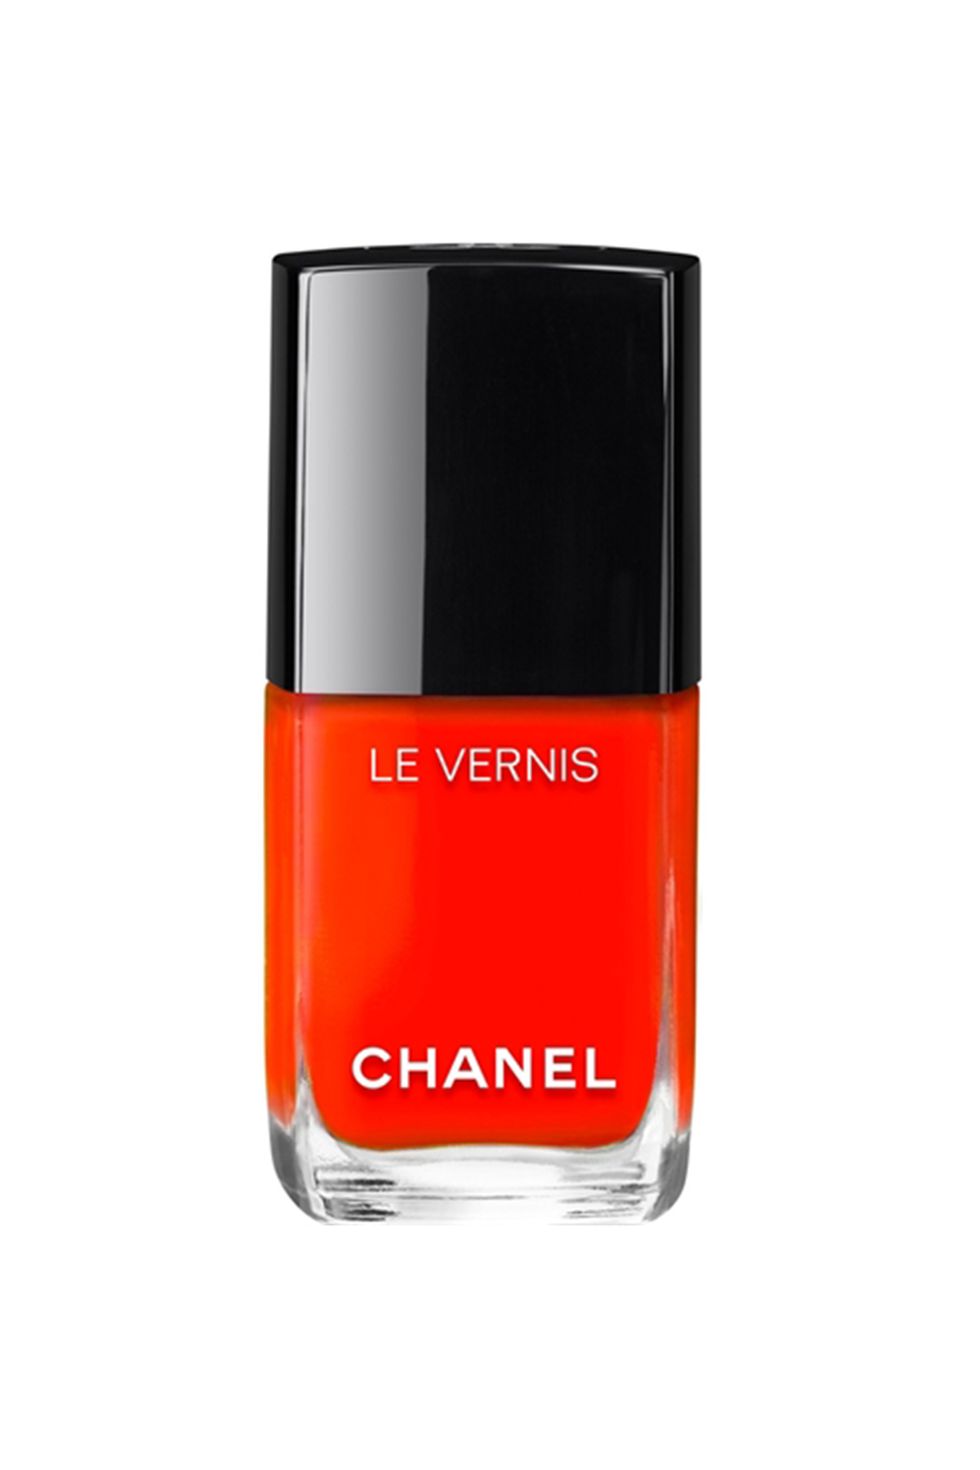 11 Best Red Nail Polish Colors - Classic Red Manicure Colors